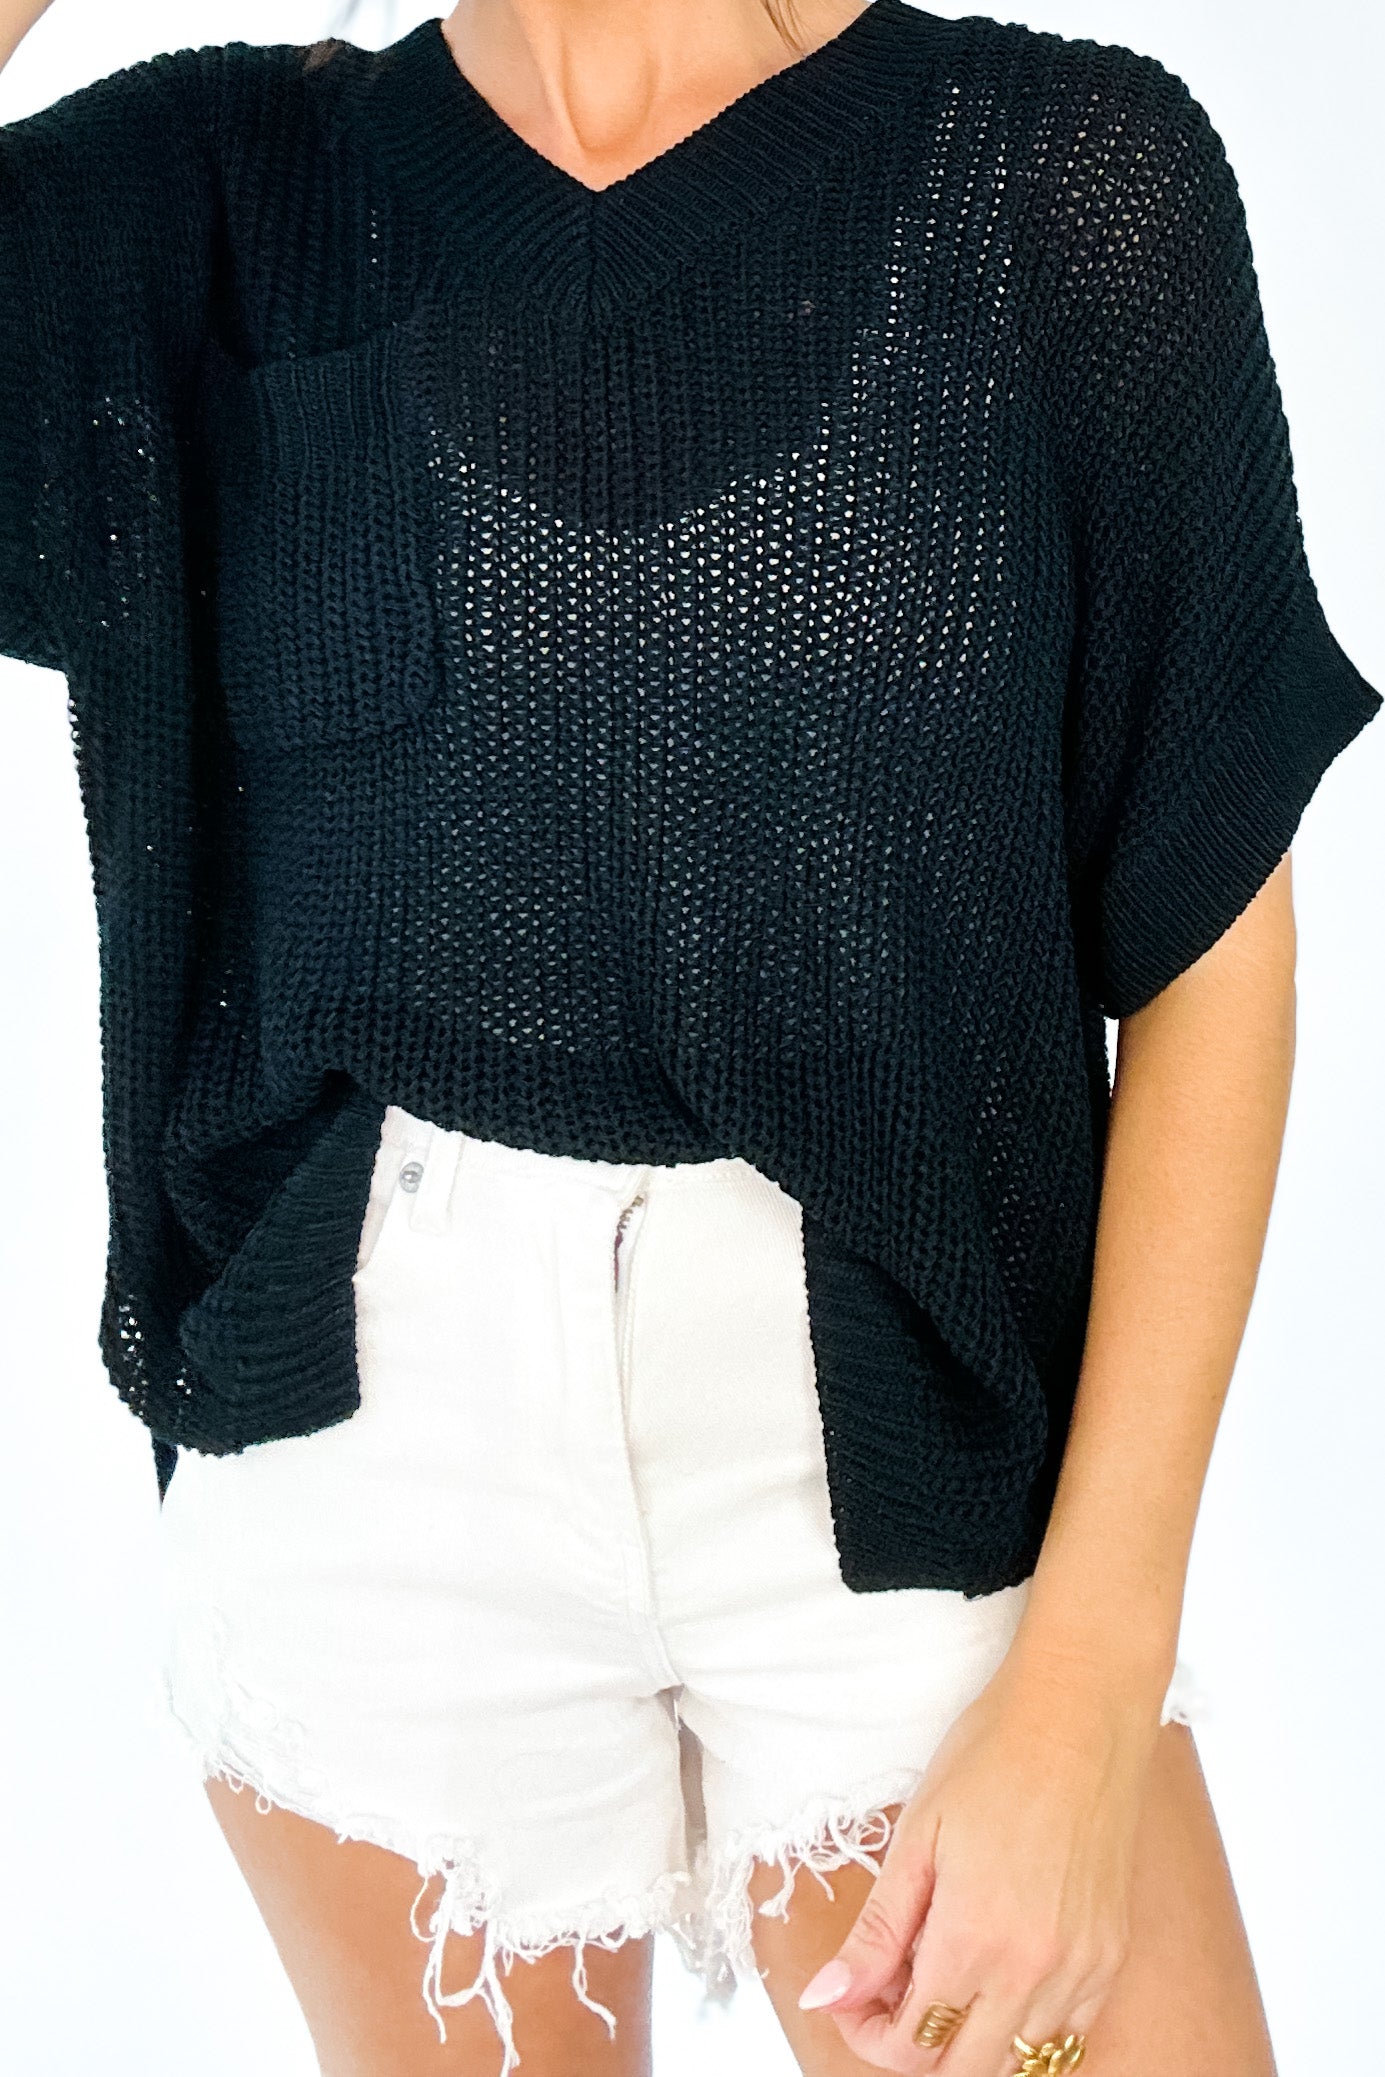 FOR KEEPS SWEATER KNIT SHORT SLEEVE TOP IN BLACK